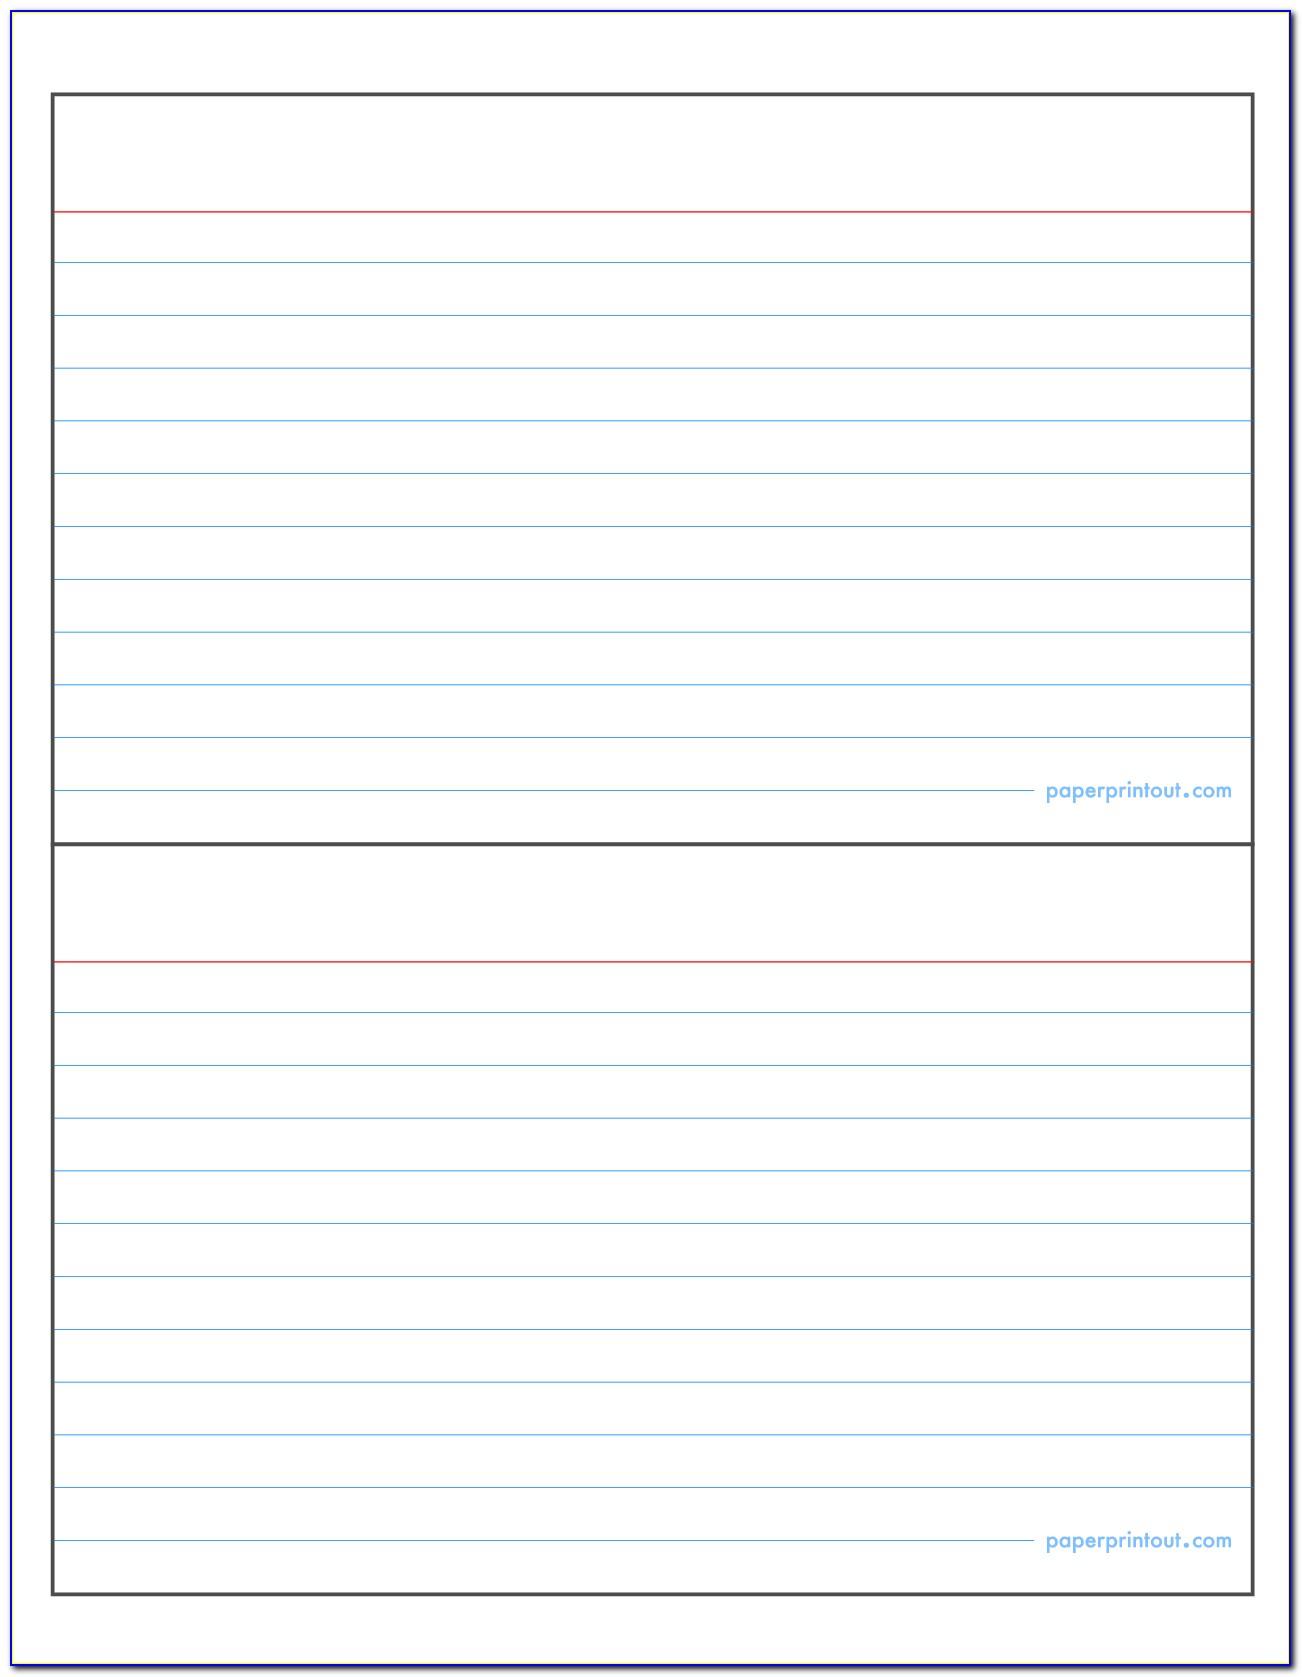 4x6 Index Card Template Word 2013